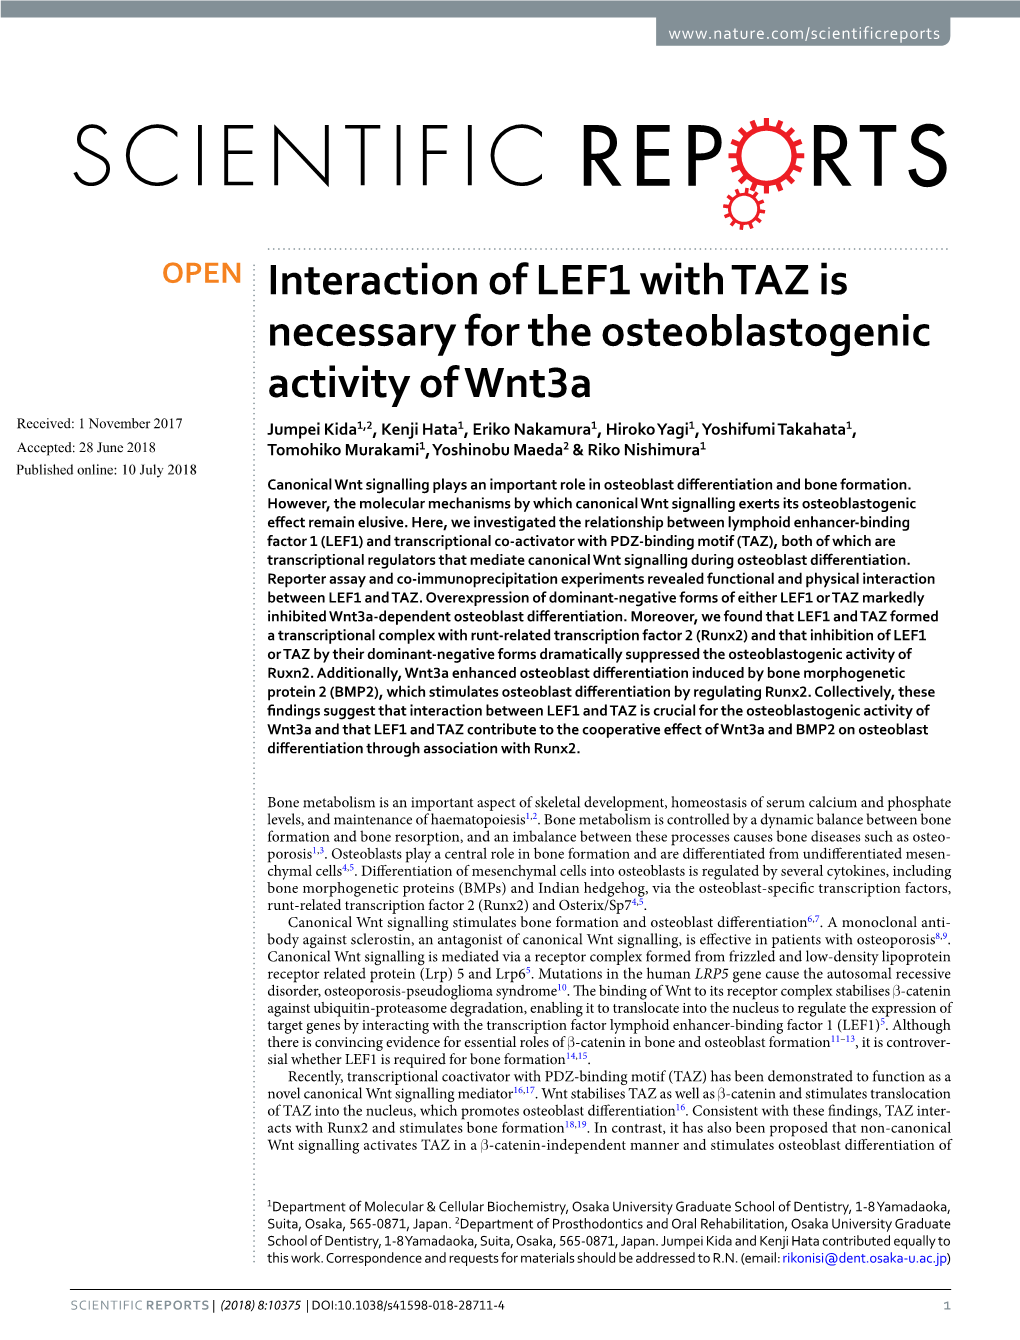 Interaction of LEF1 with TAZ Is Necessary for the Osteoblastogenic